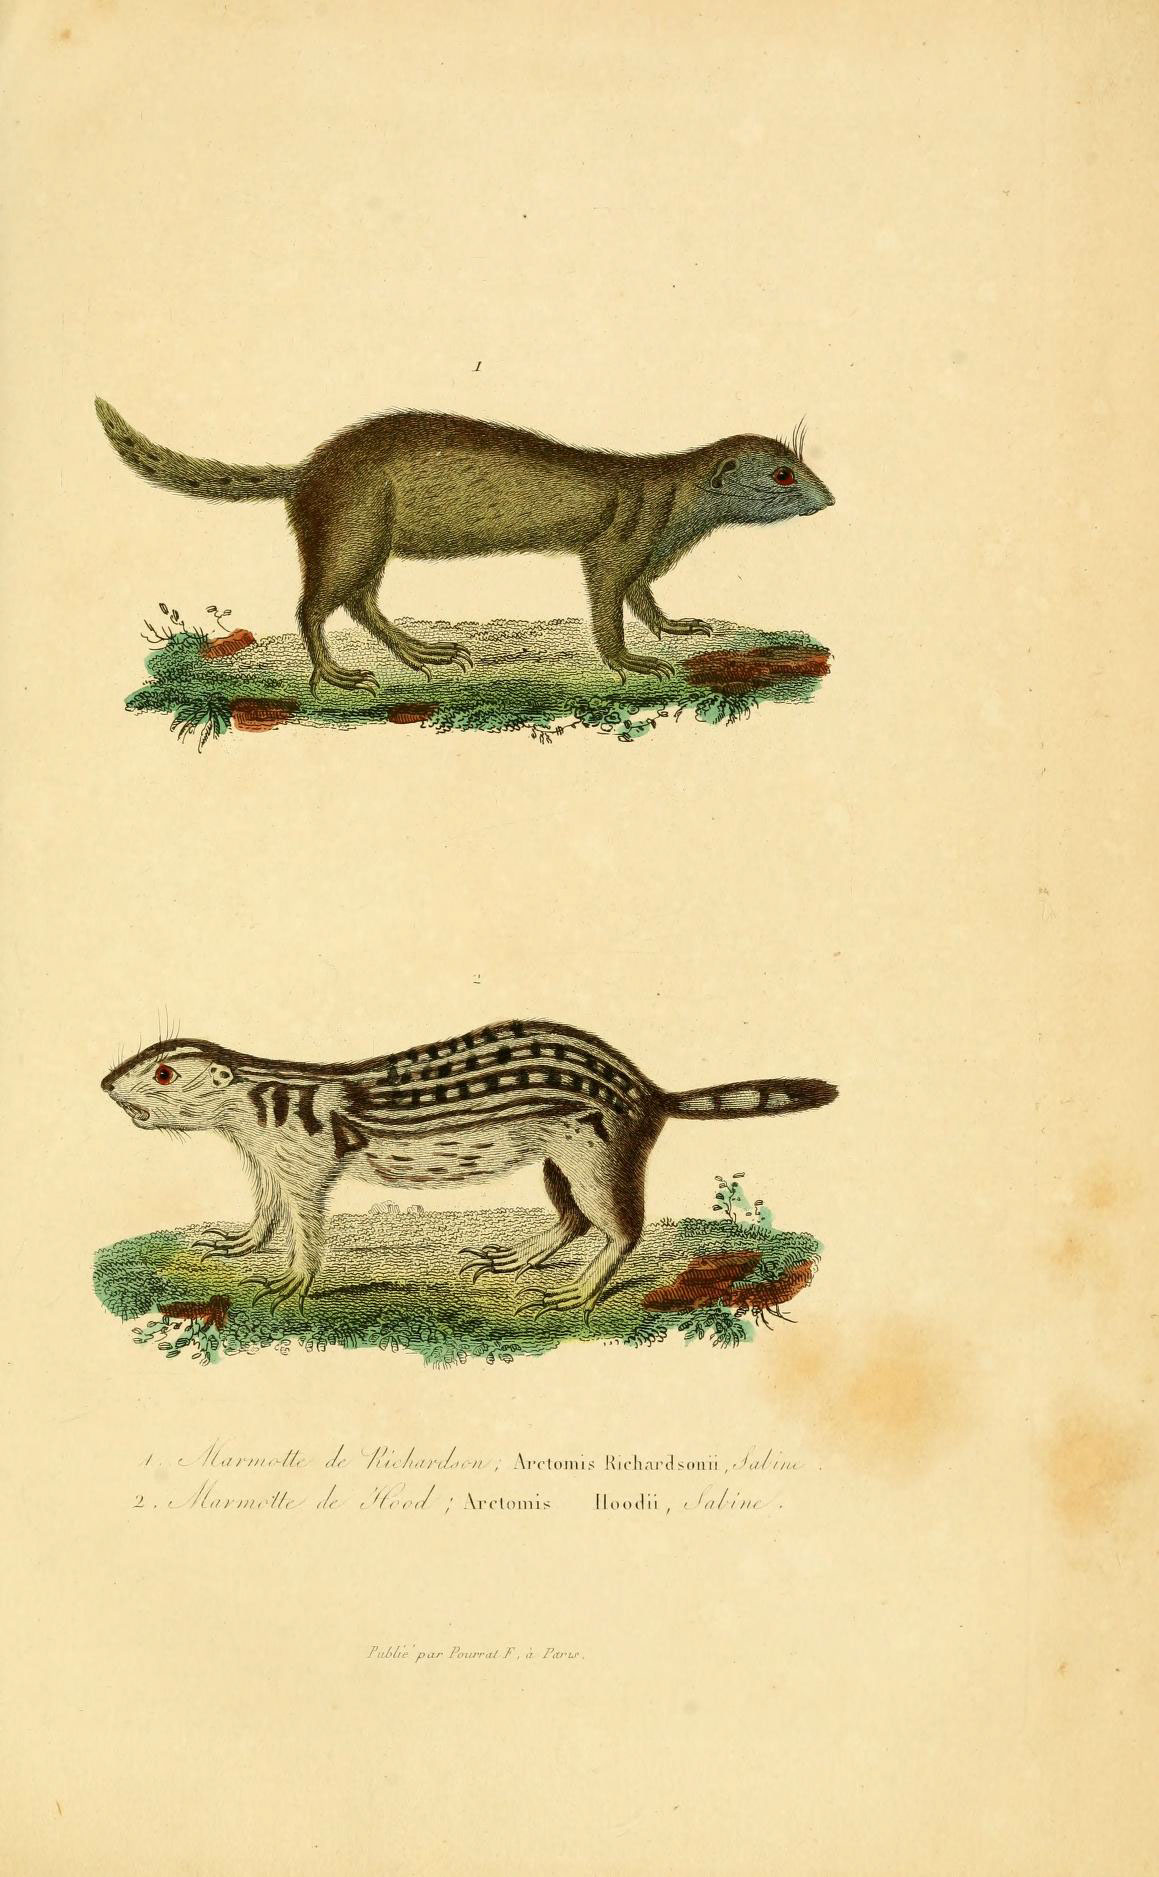 two illustration of the long - tailed weasel on which a cat is standing